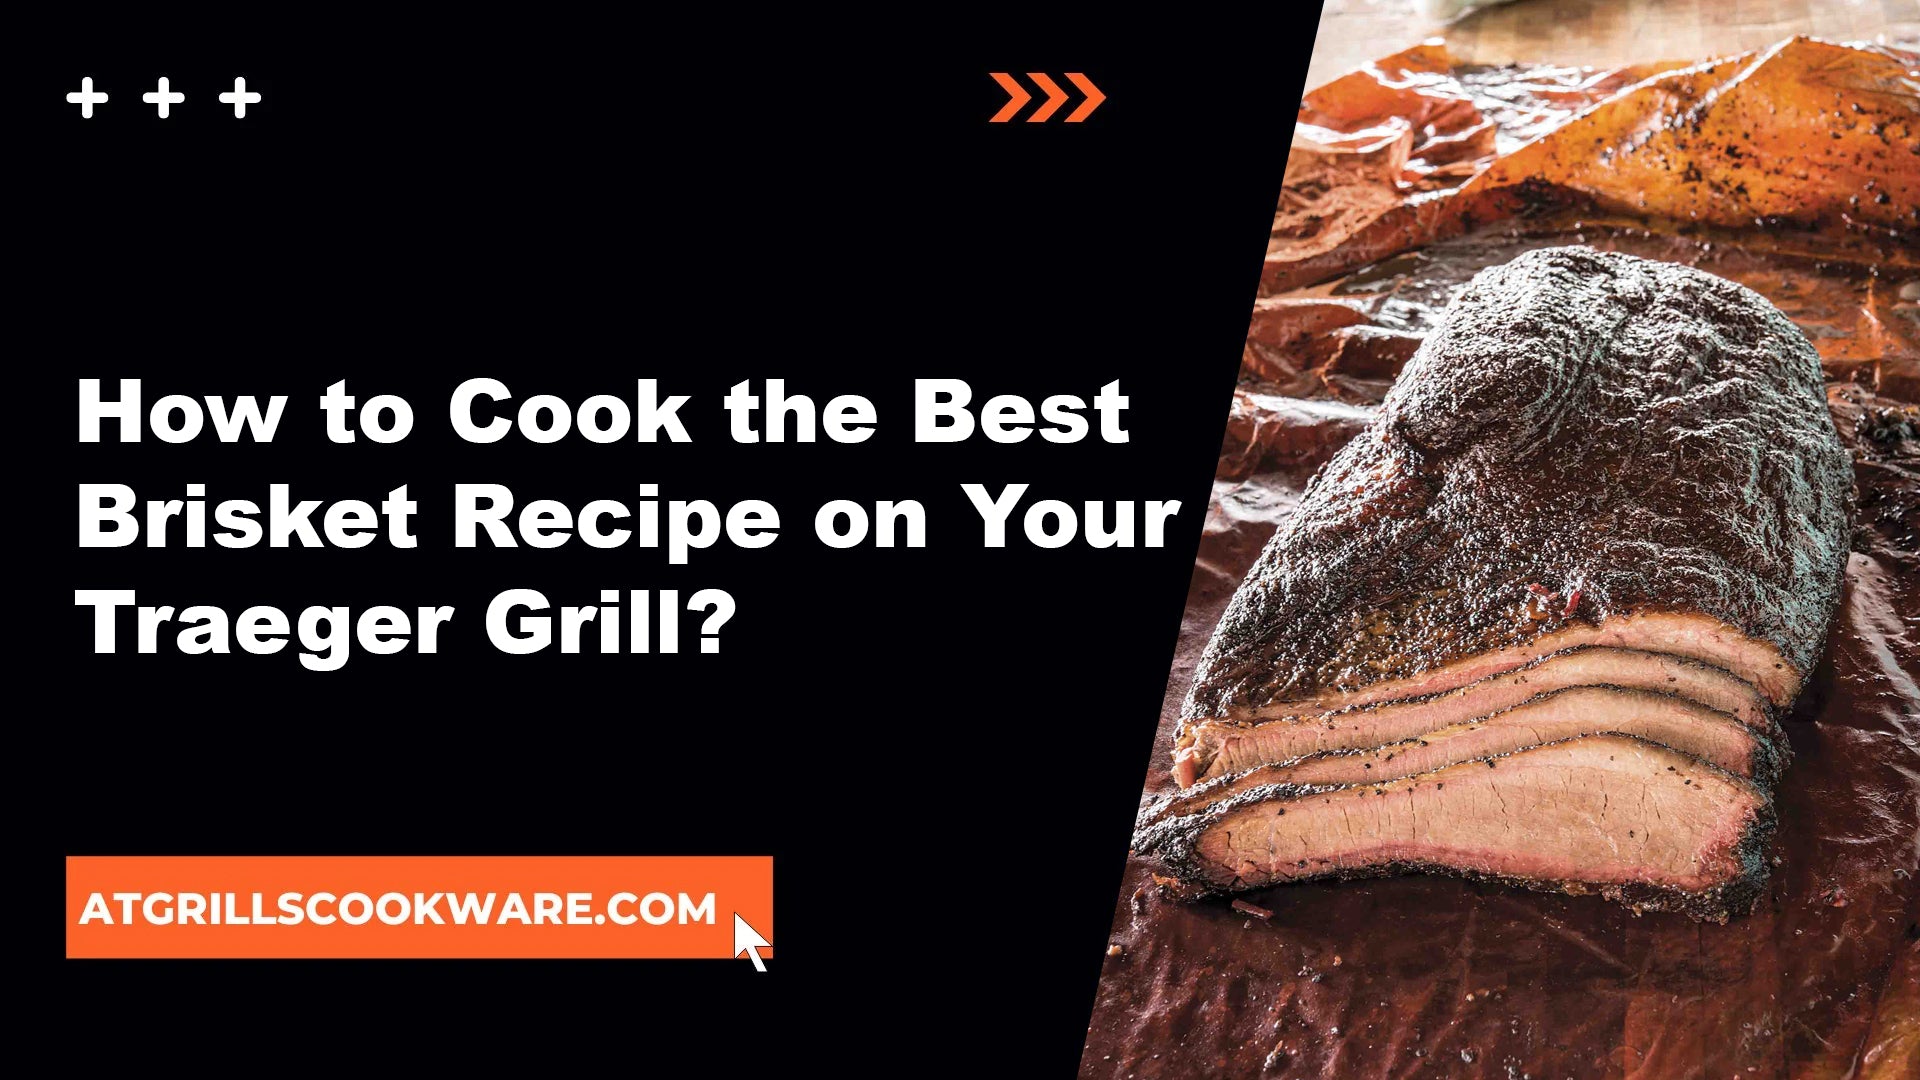 How to Cook the Best Brisket Recipe on Your Traeger Grill